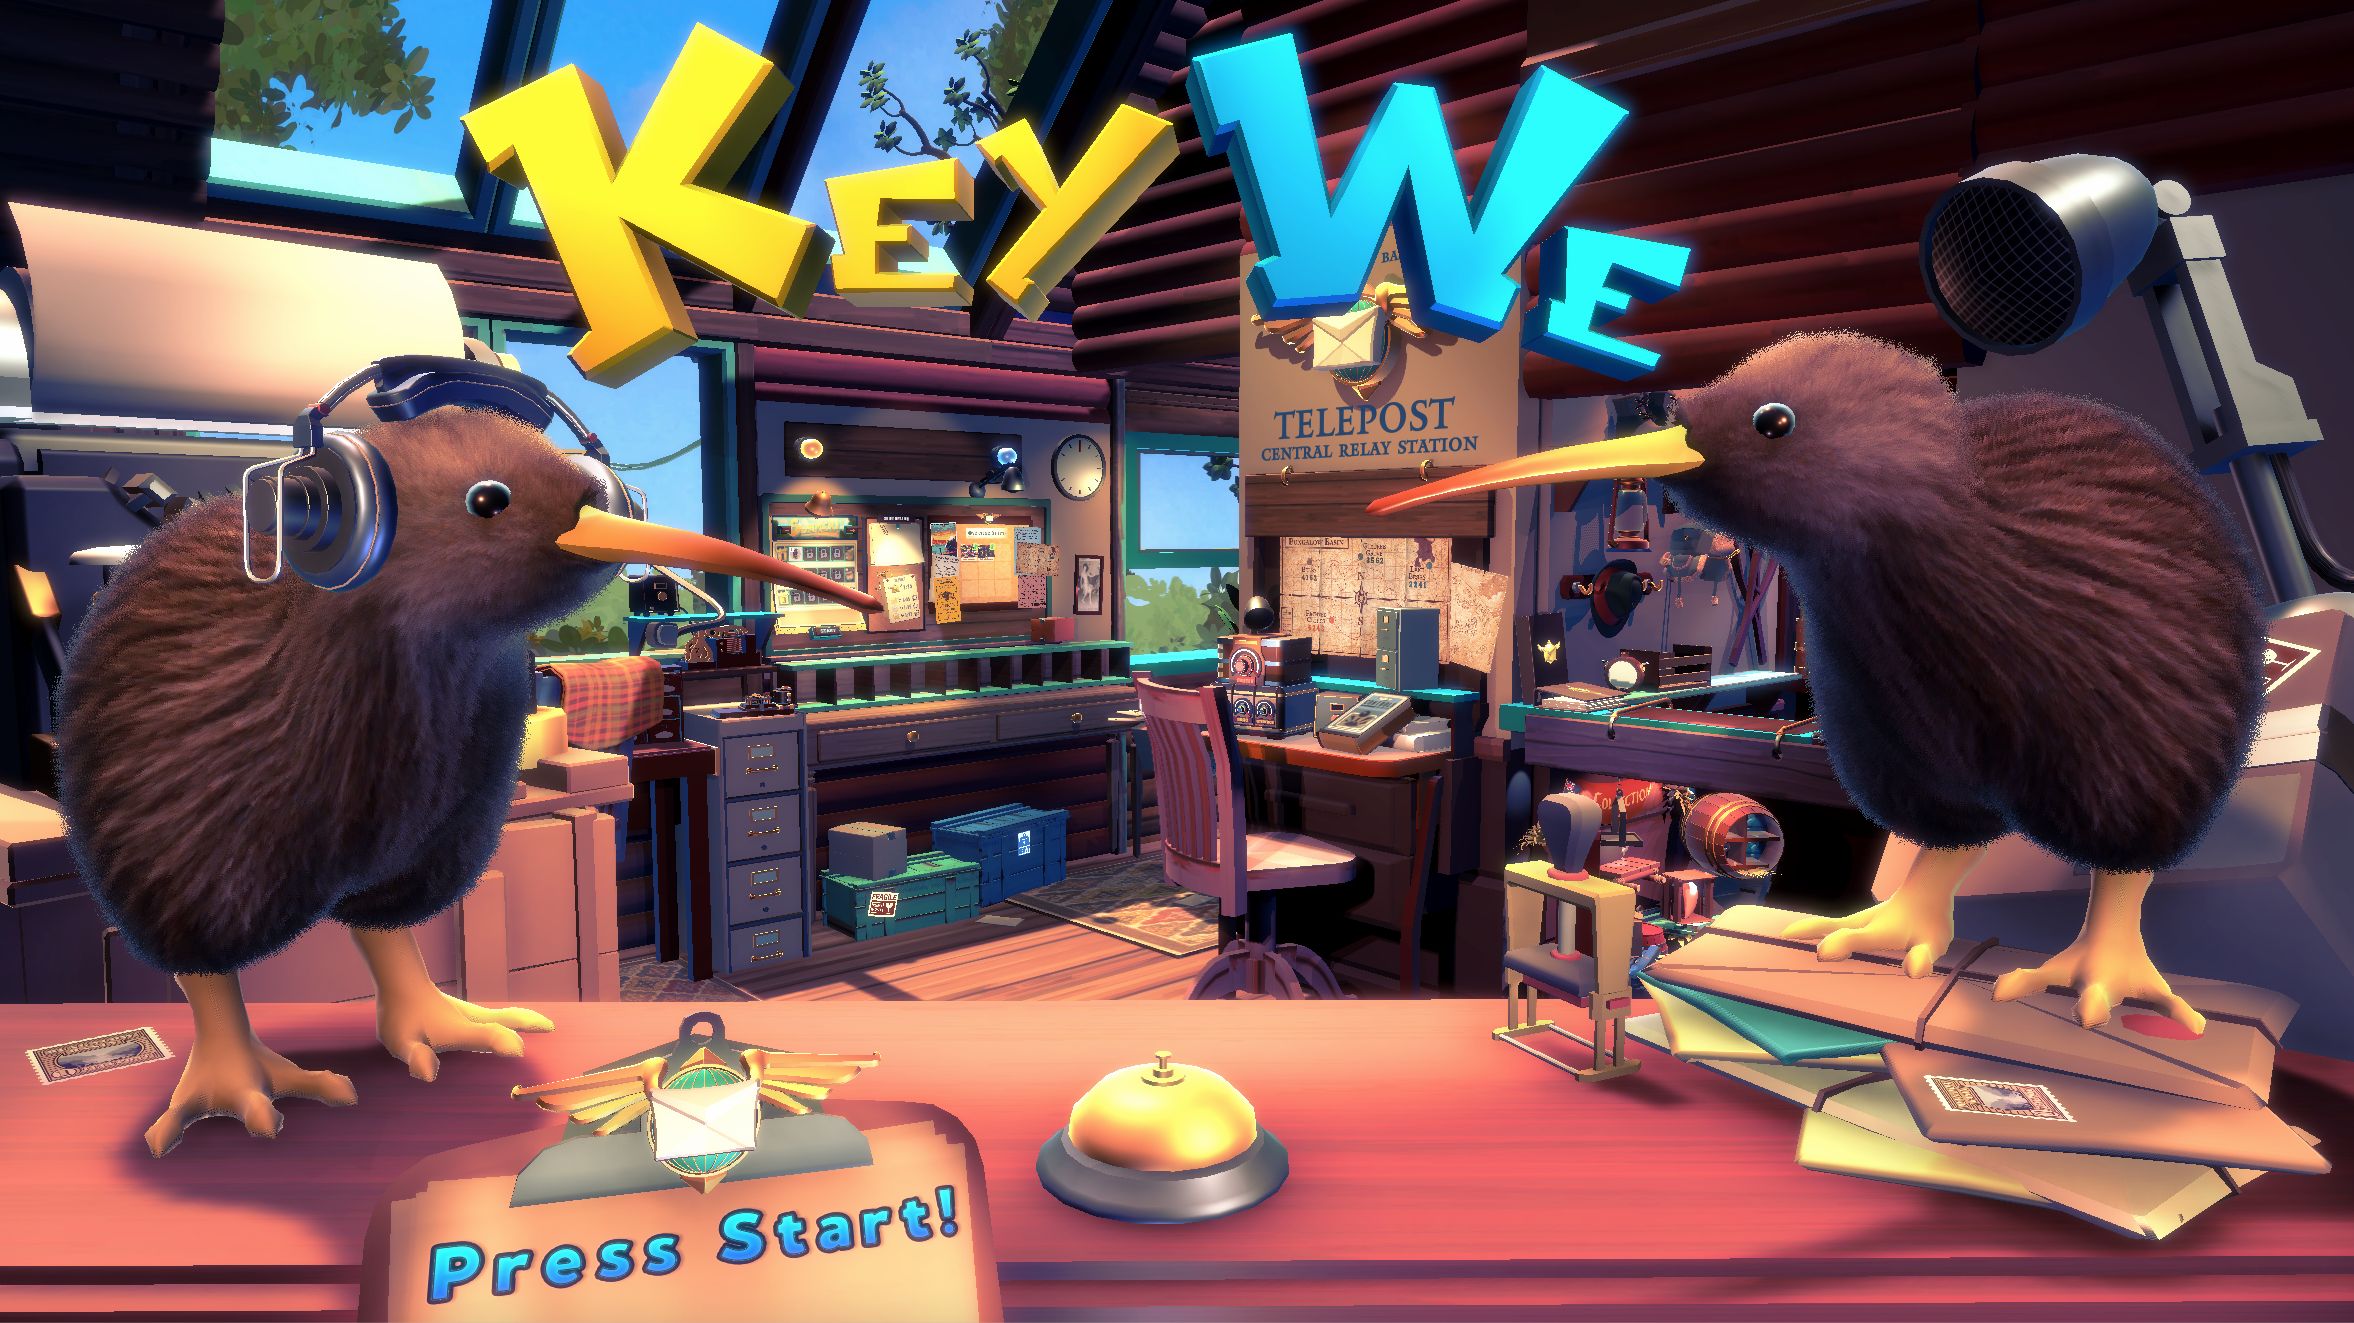 The title screen of KeyWe, showing the telepost office in the background and two kiwi birds standing on a desk in the foreground